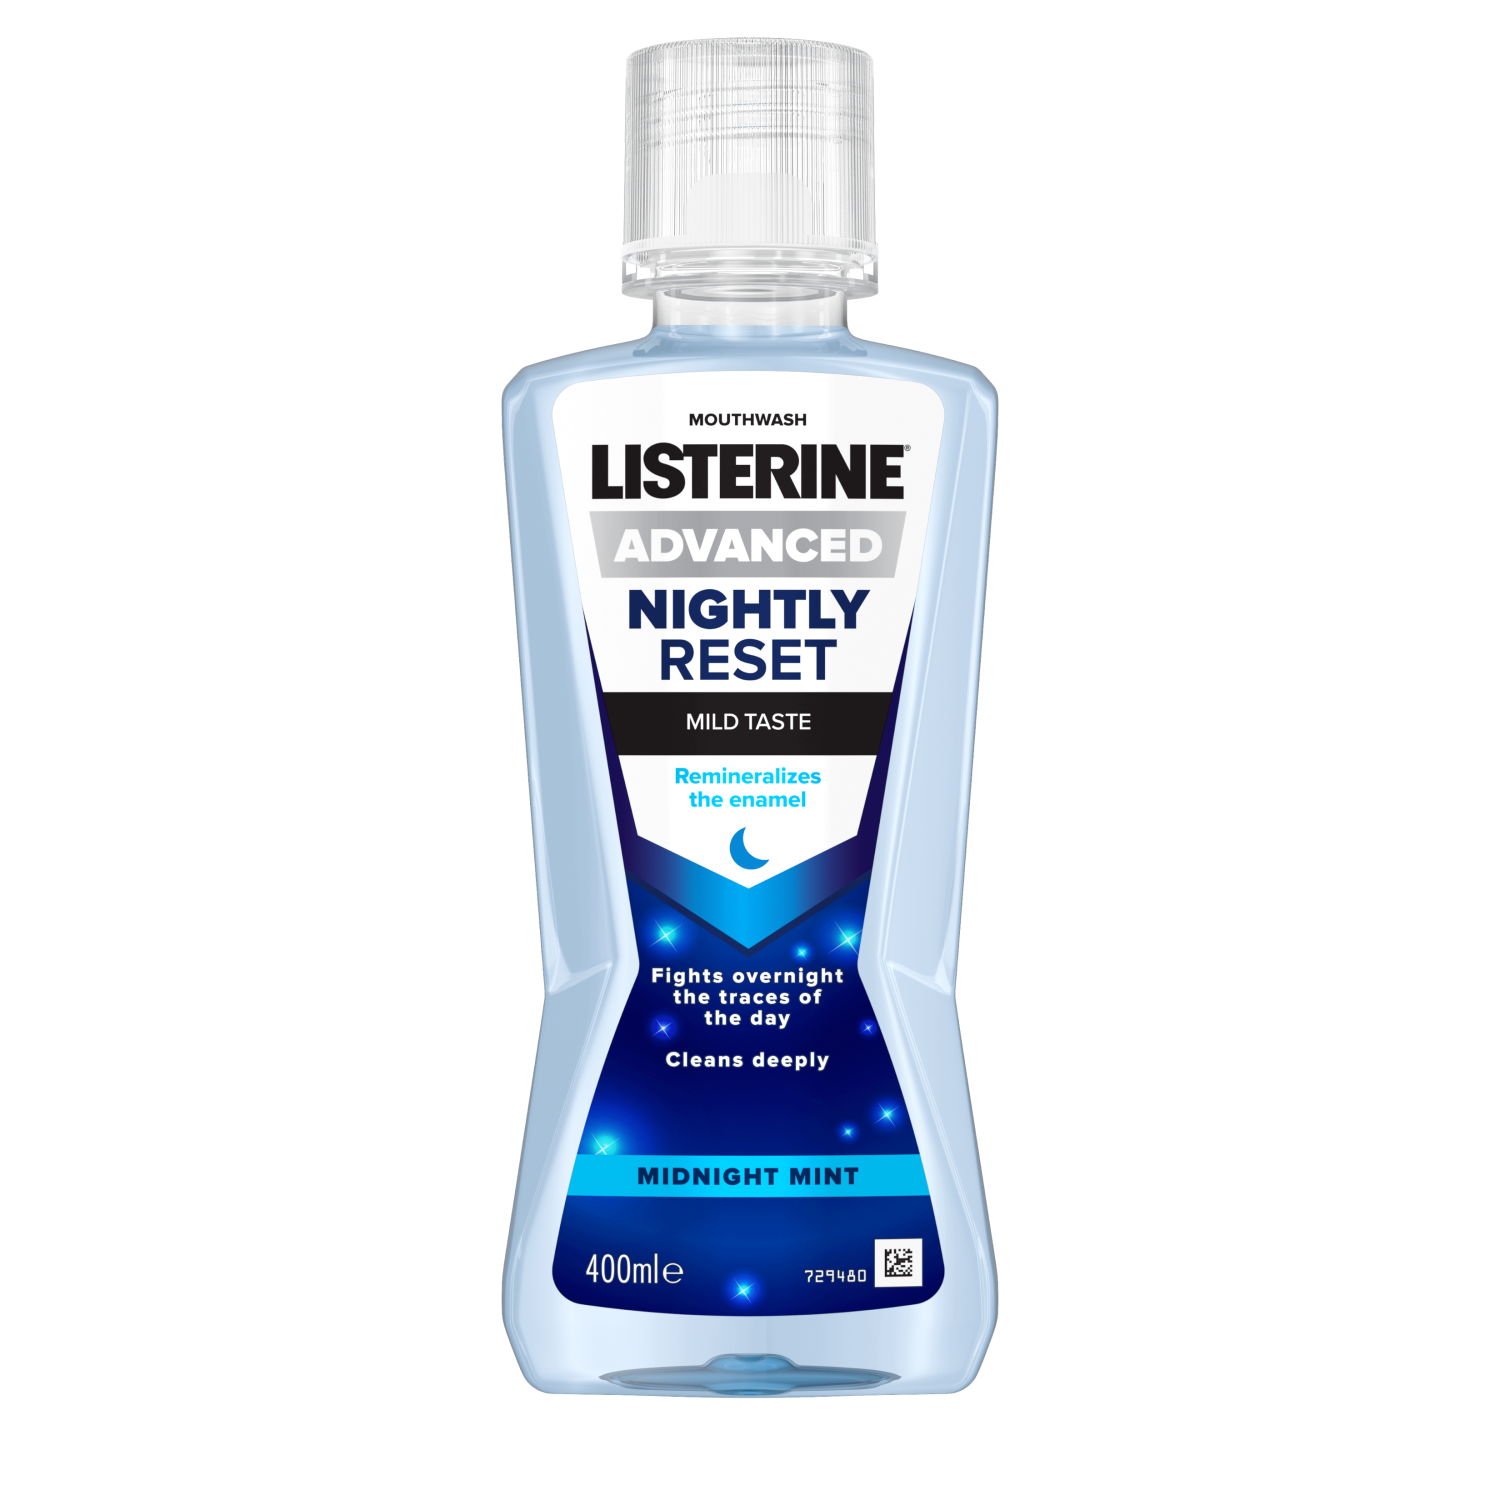 Listerine Advanced Nightly Reset Mild Taste Midnight Mint 400 ml, remineralizes the enamel, fights overnight the traces of the day, cleans deeply feliratokkal